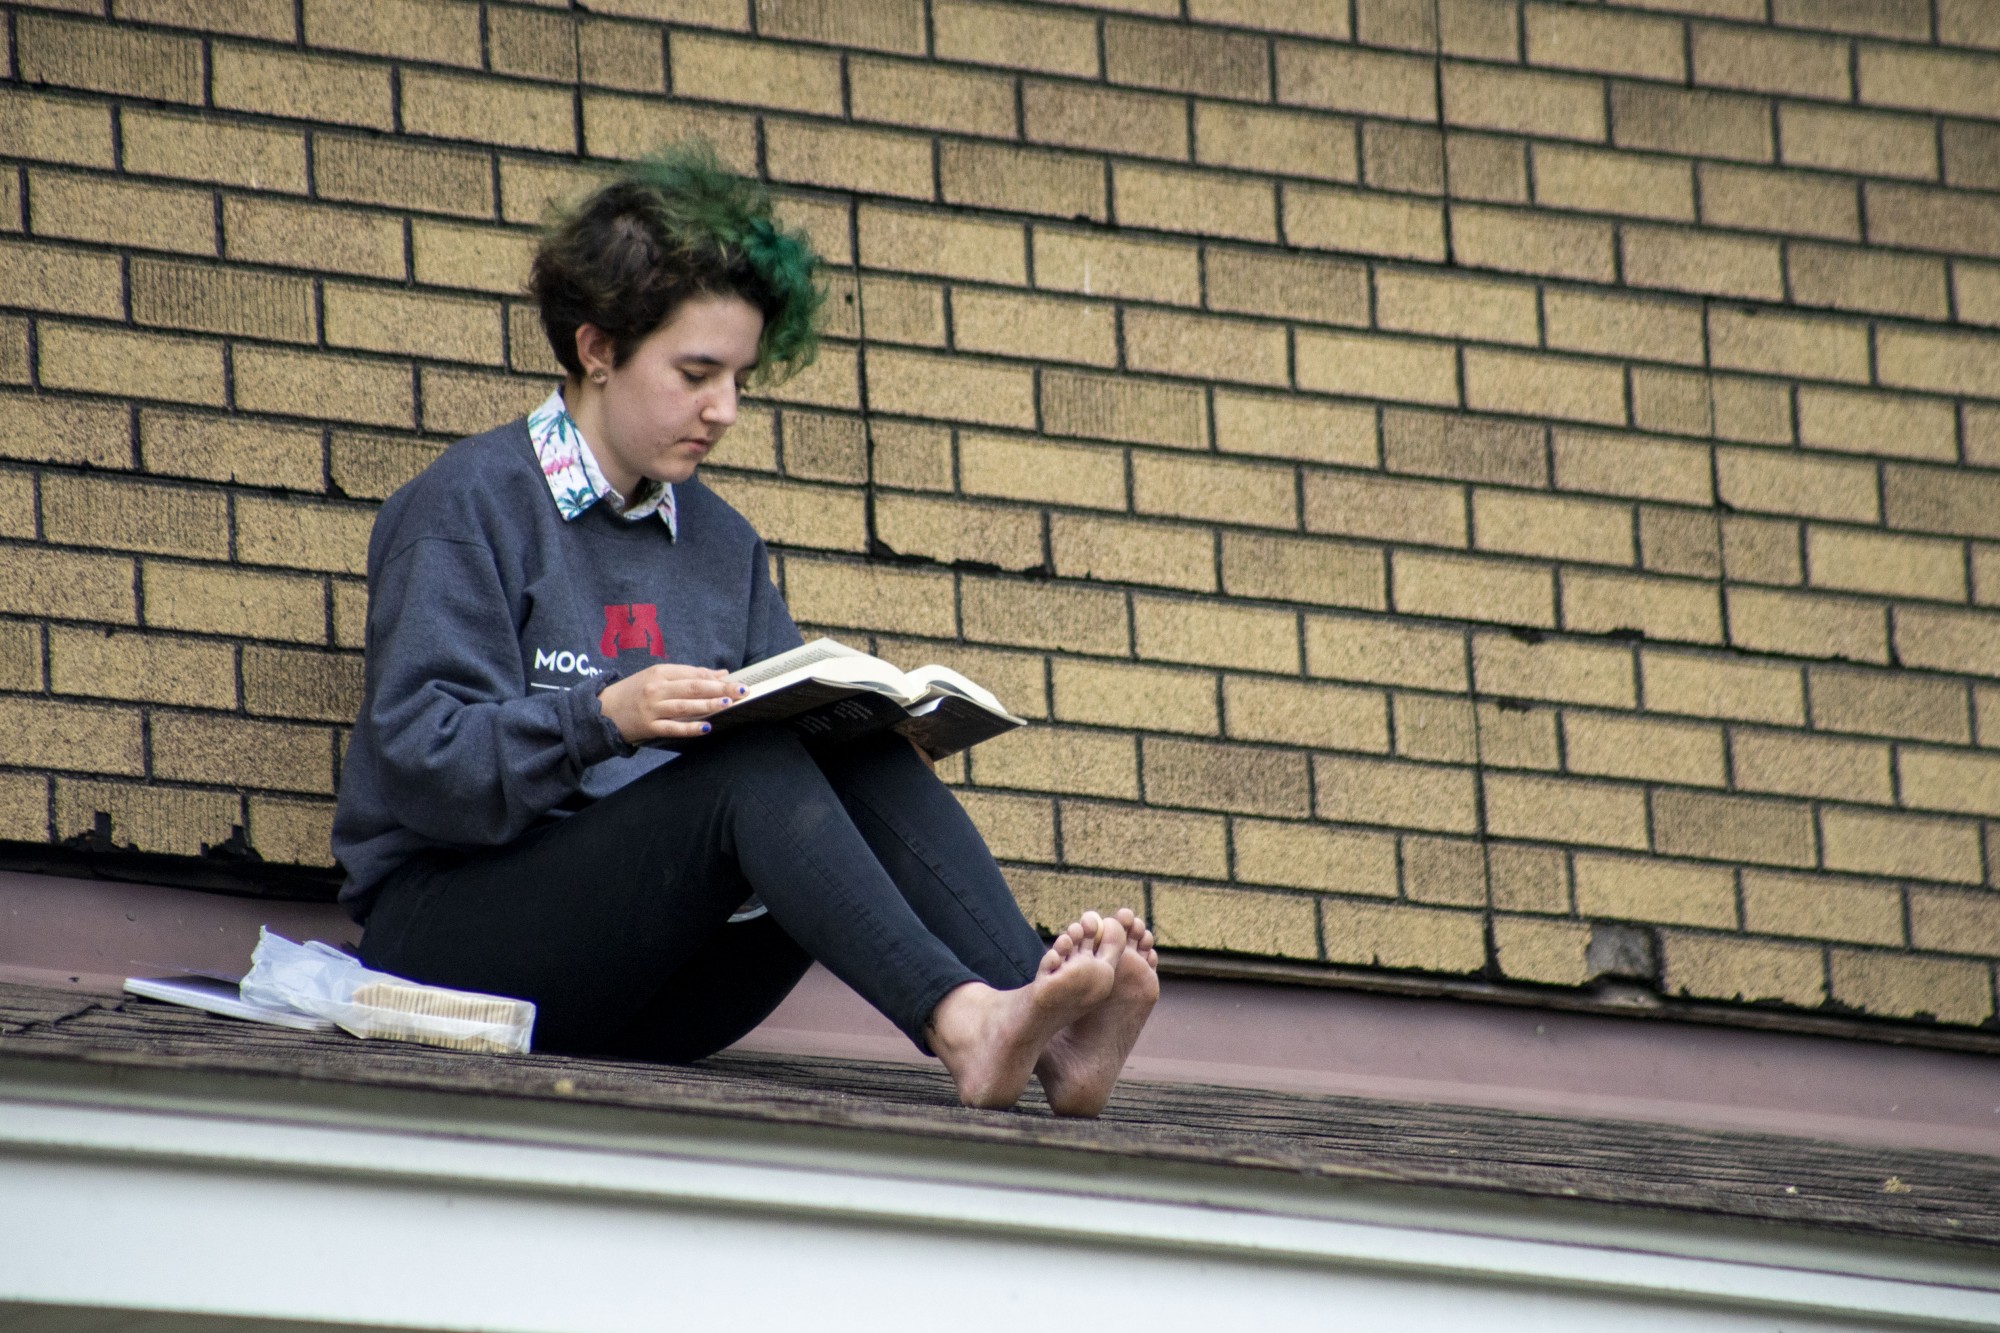 6:21 p.m.
Lilly Keefe-Powers reads a book on a Dinkytown rooftop. 